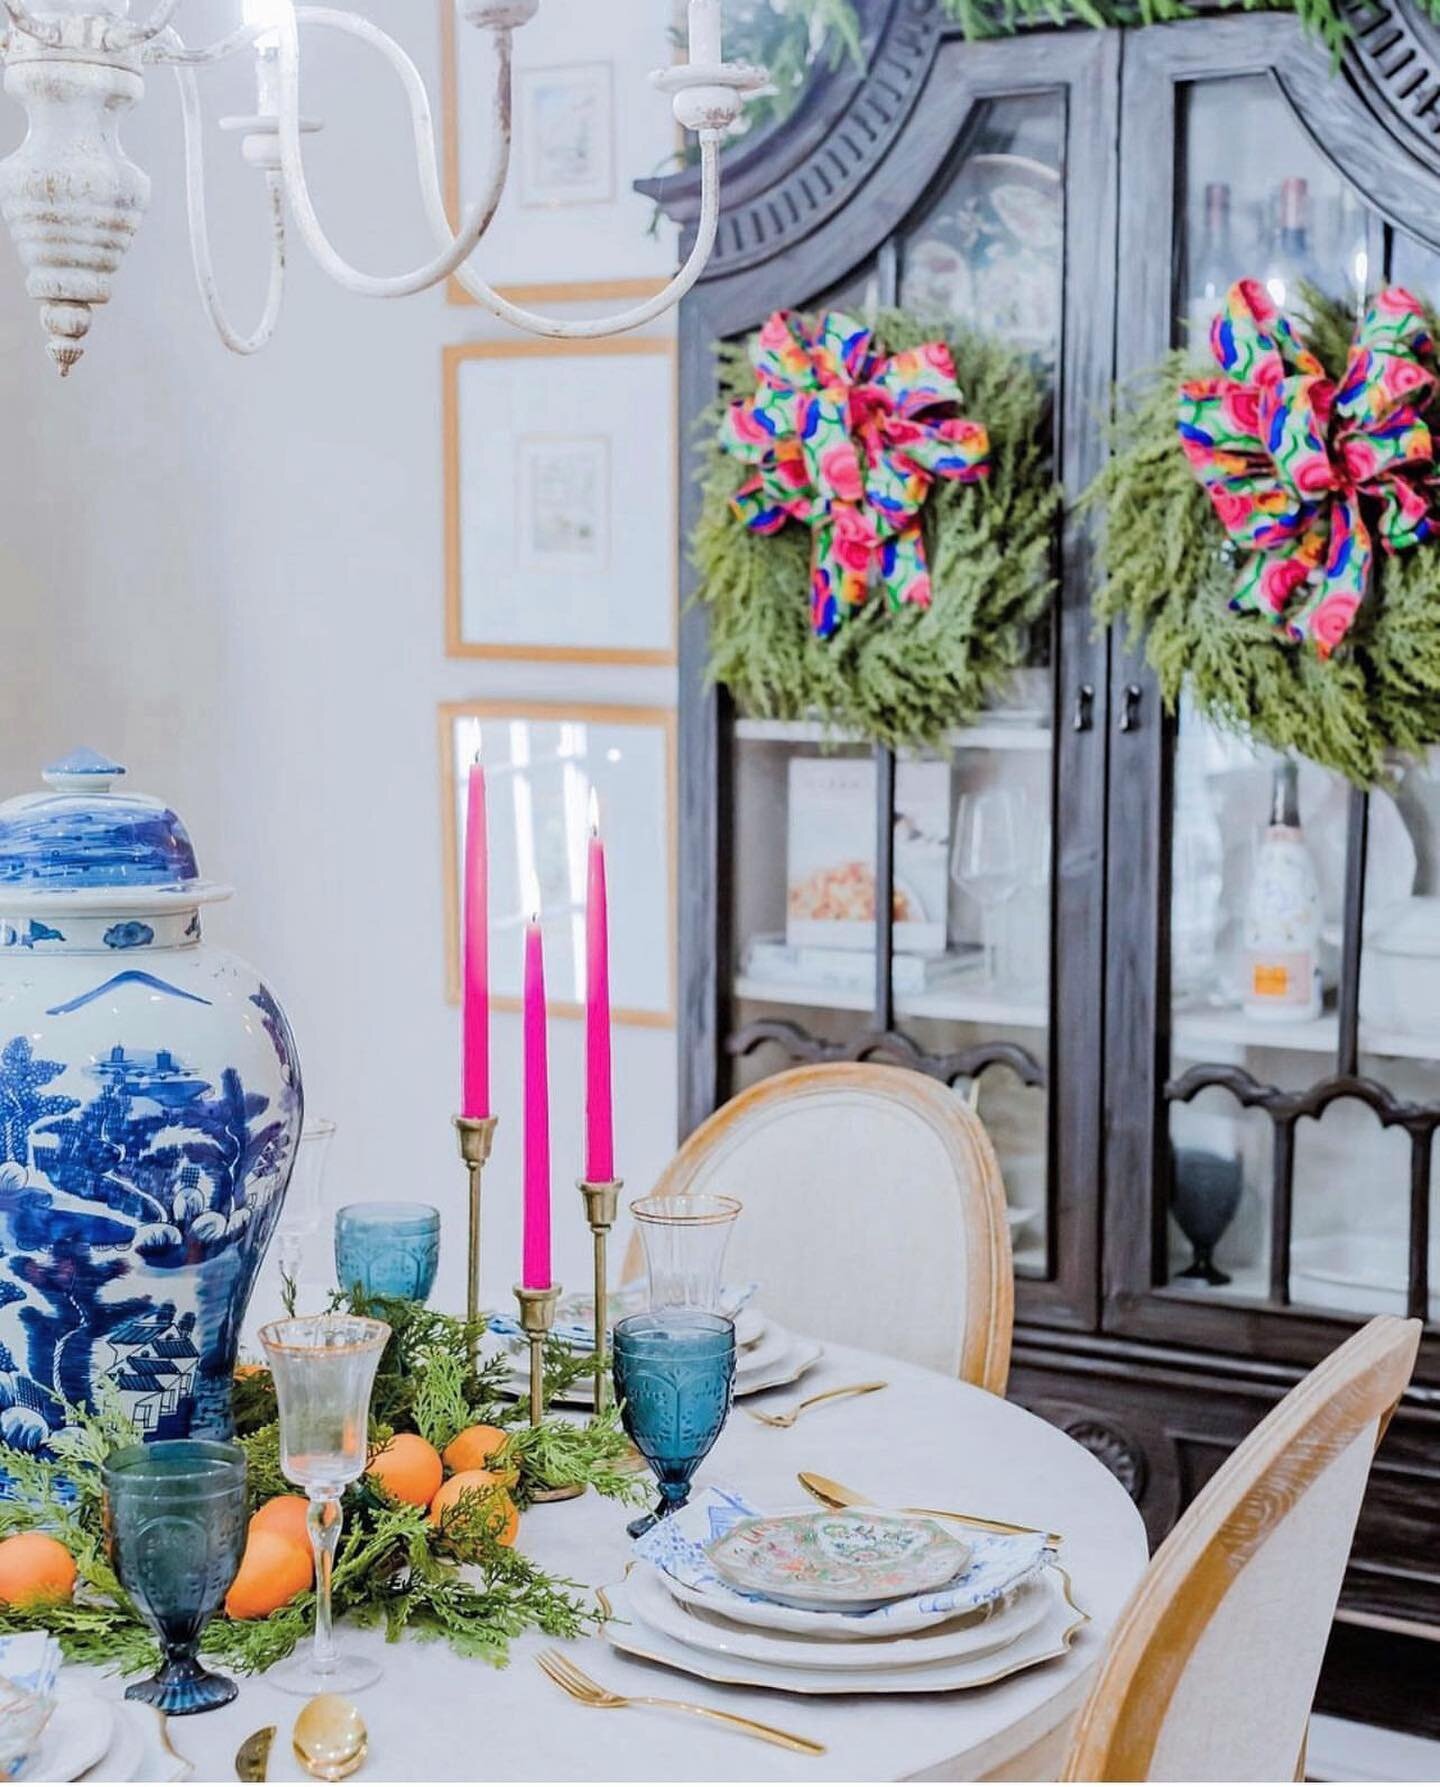 This ribbon was the perfect addition to this years holiday decor! The embellished design &amp; vibrant colors make such a statement! ✨ 

📸: @amyjowenphoto 

#interiordesign #interiordesigner #kings #kinginteriordesigns #holidaydecor #holidaydesign #